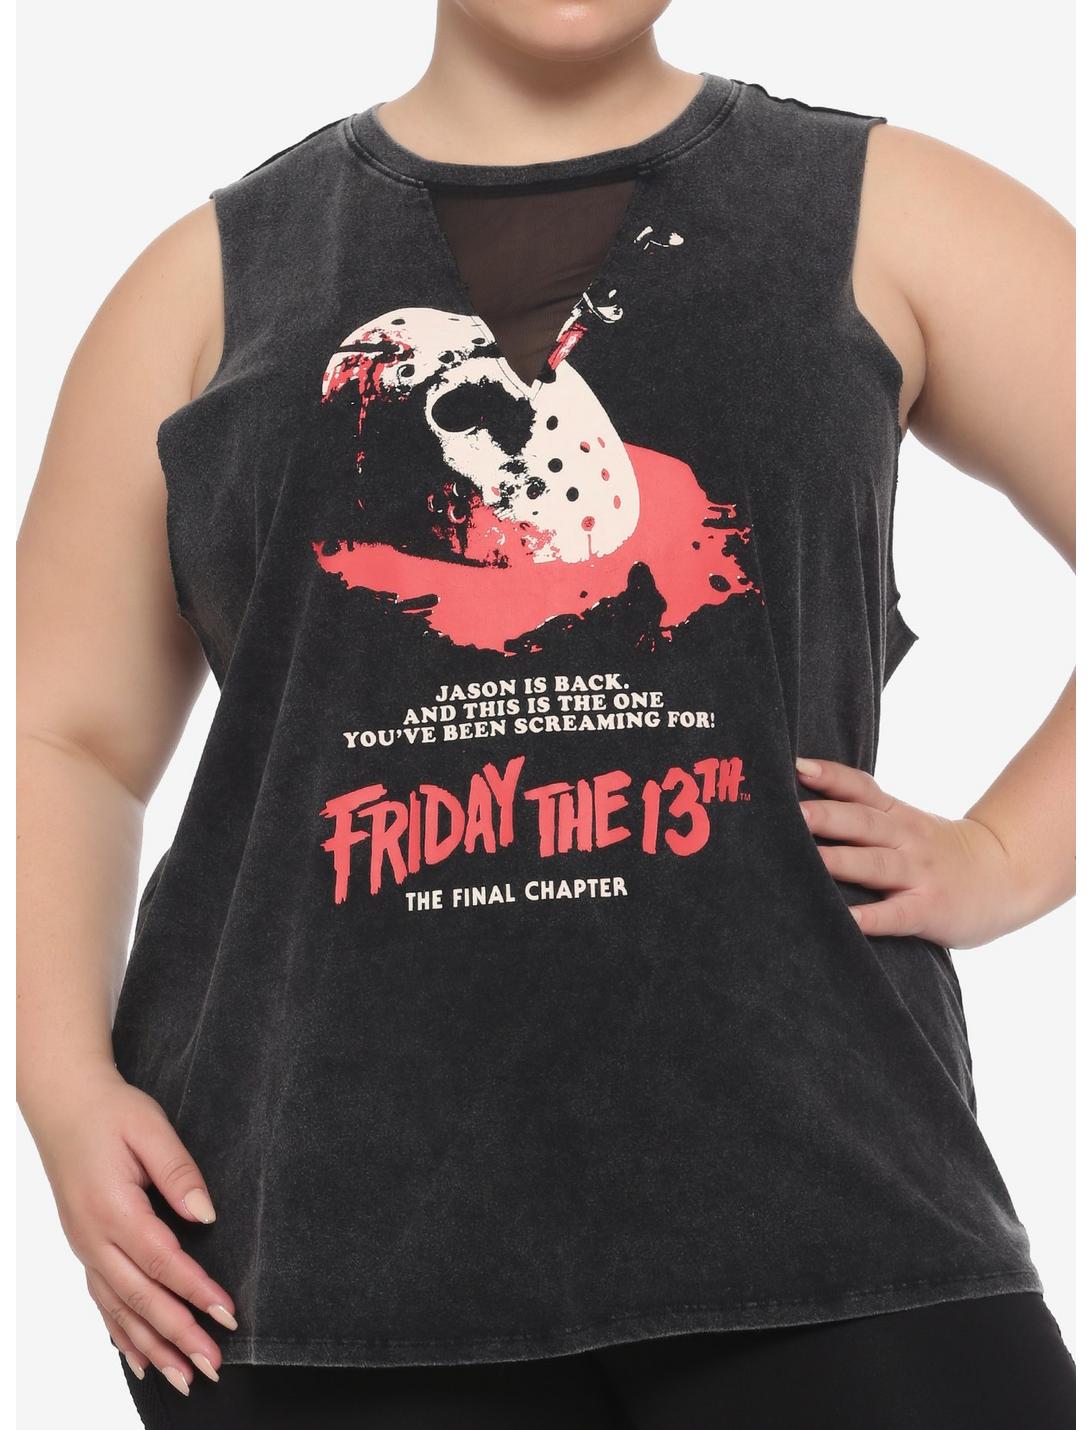 Friday The 13th: The Final Chapter Poster Mesh Insert Girls Muscle Top Plus Size, MULTI, hi-res